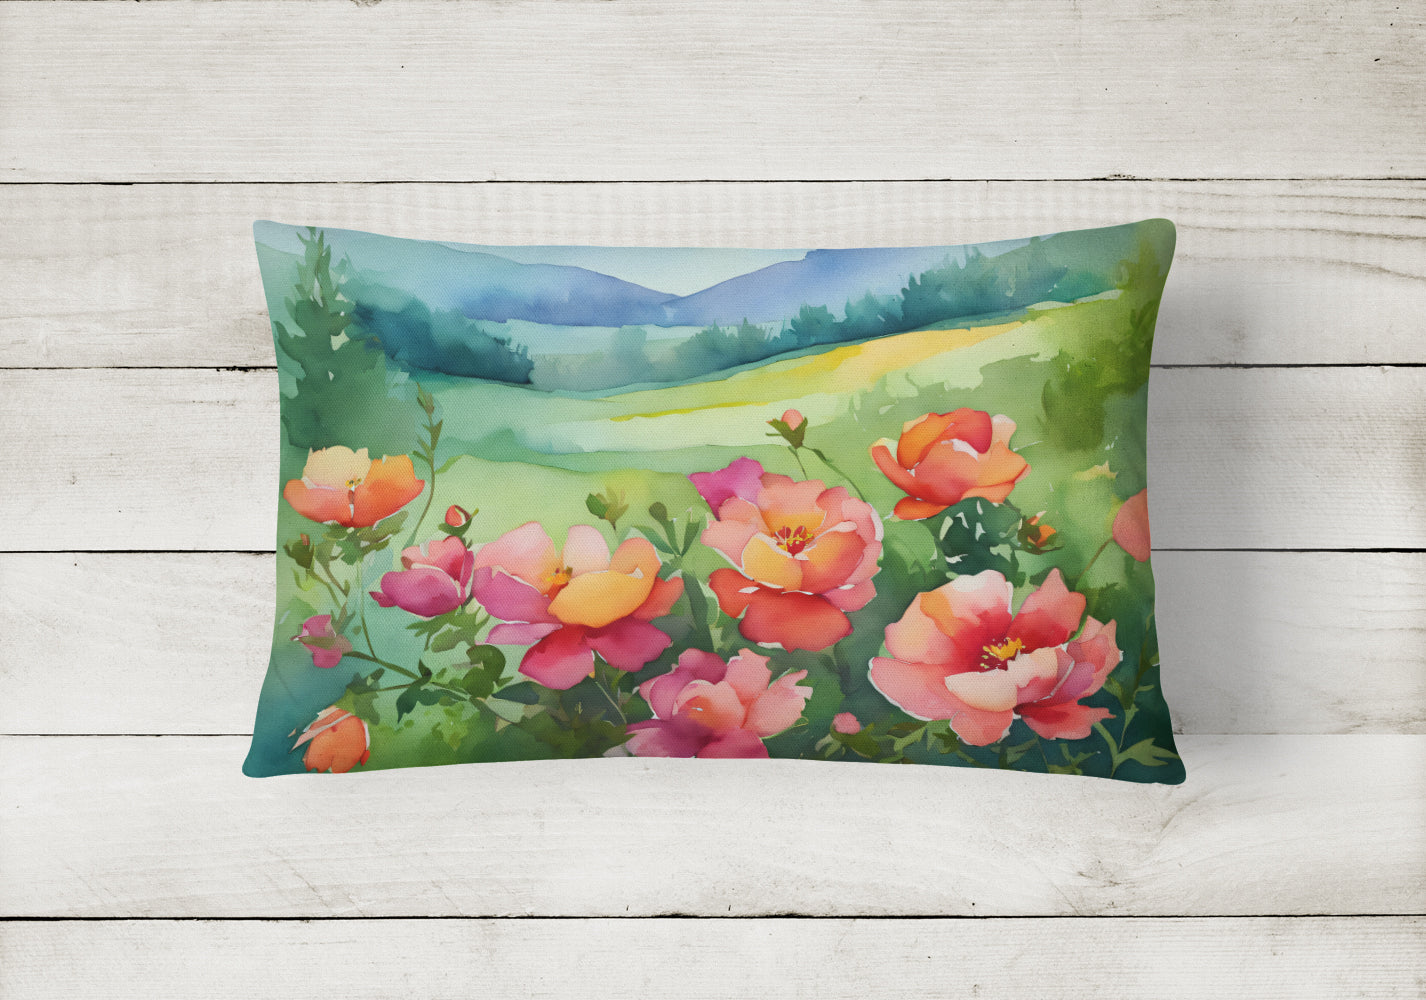 Buy this Iowa Wild Prairie Roses in Watercolor Fabric Decorative Pillow